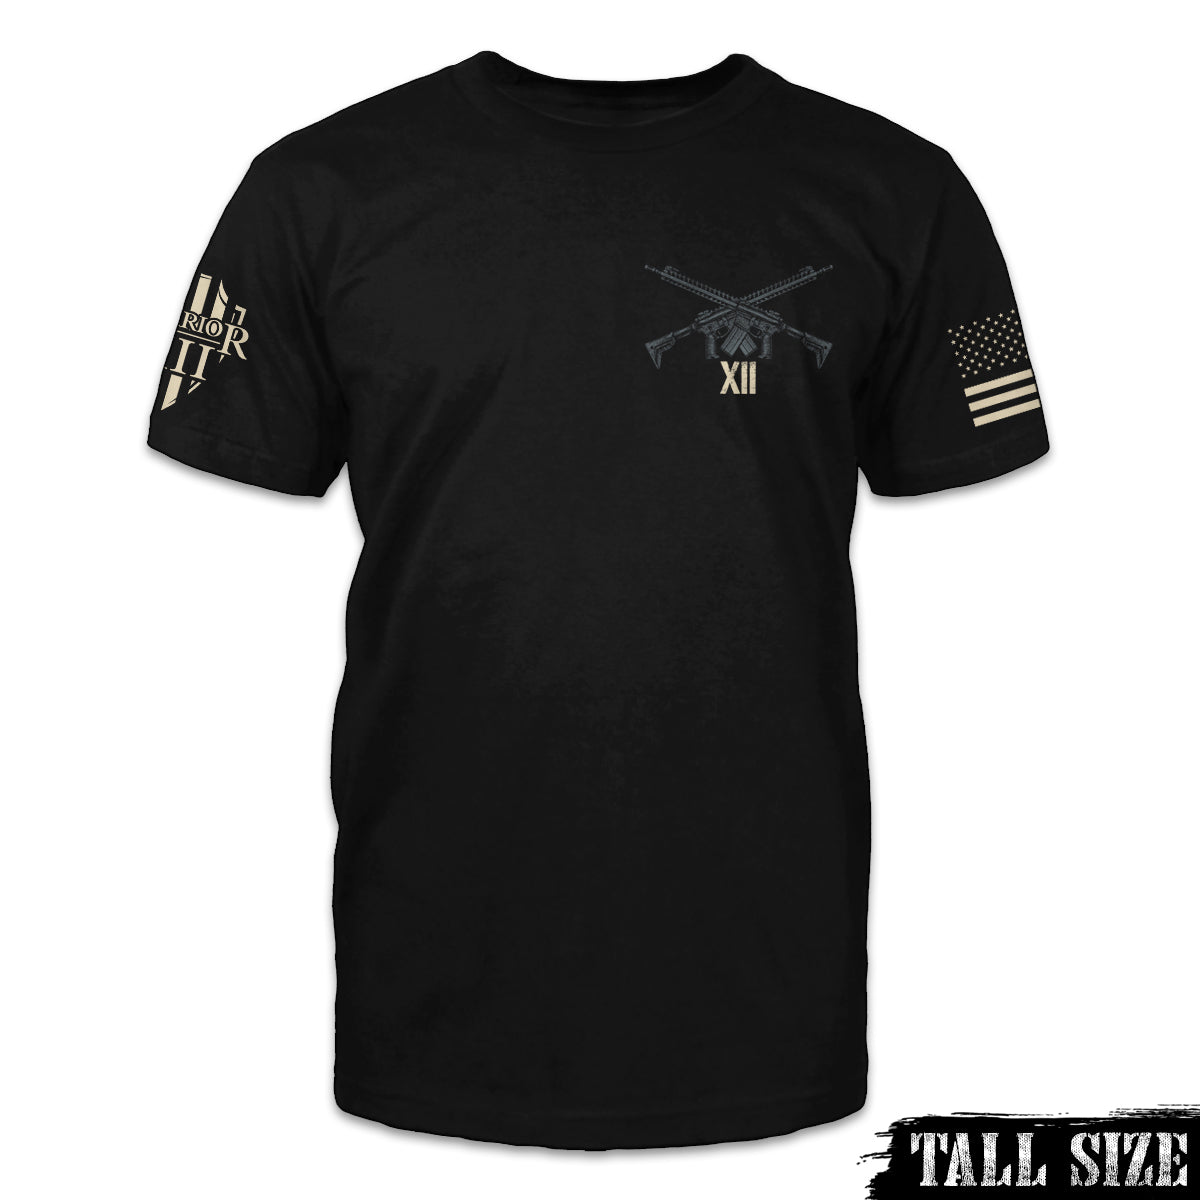 A black tall size shirt with two AR15's crossed over printed on the front of the shirt.